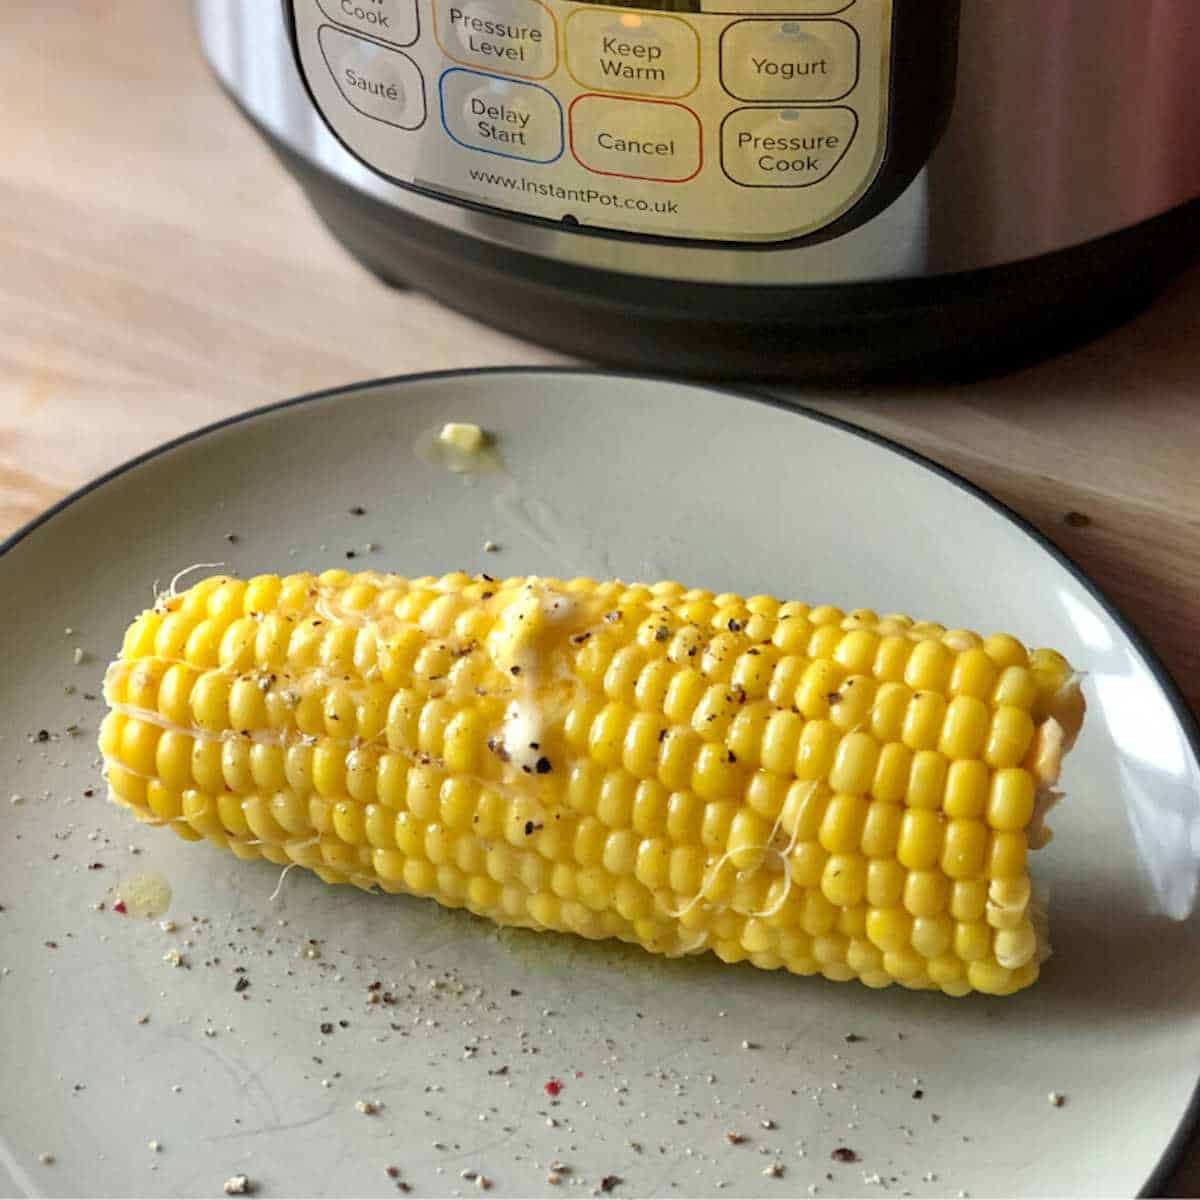 Photo of the pressure cooked sweetcorn on the cob on a plate with an Instant Pot Duo Mini at the back